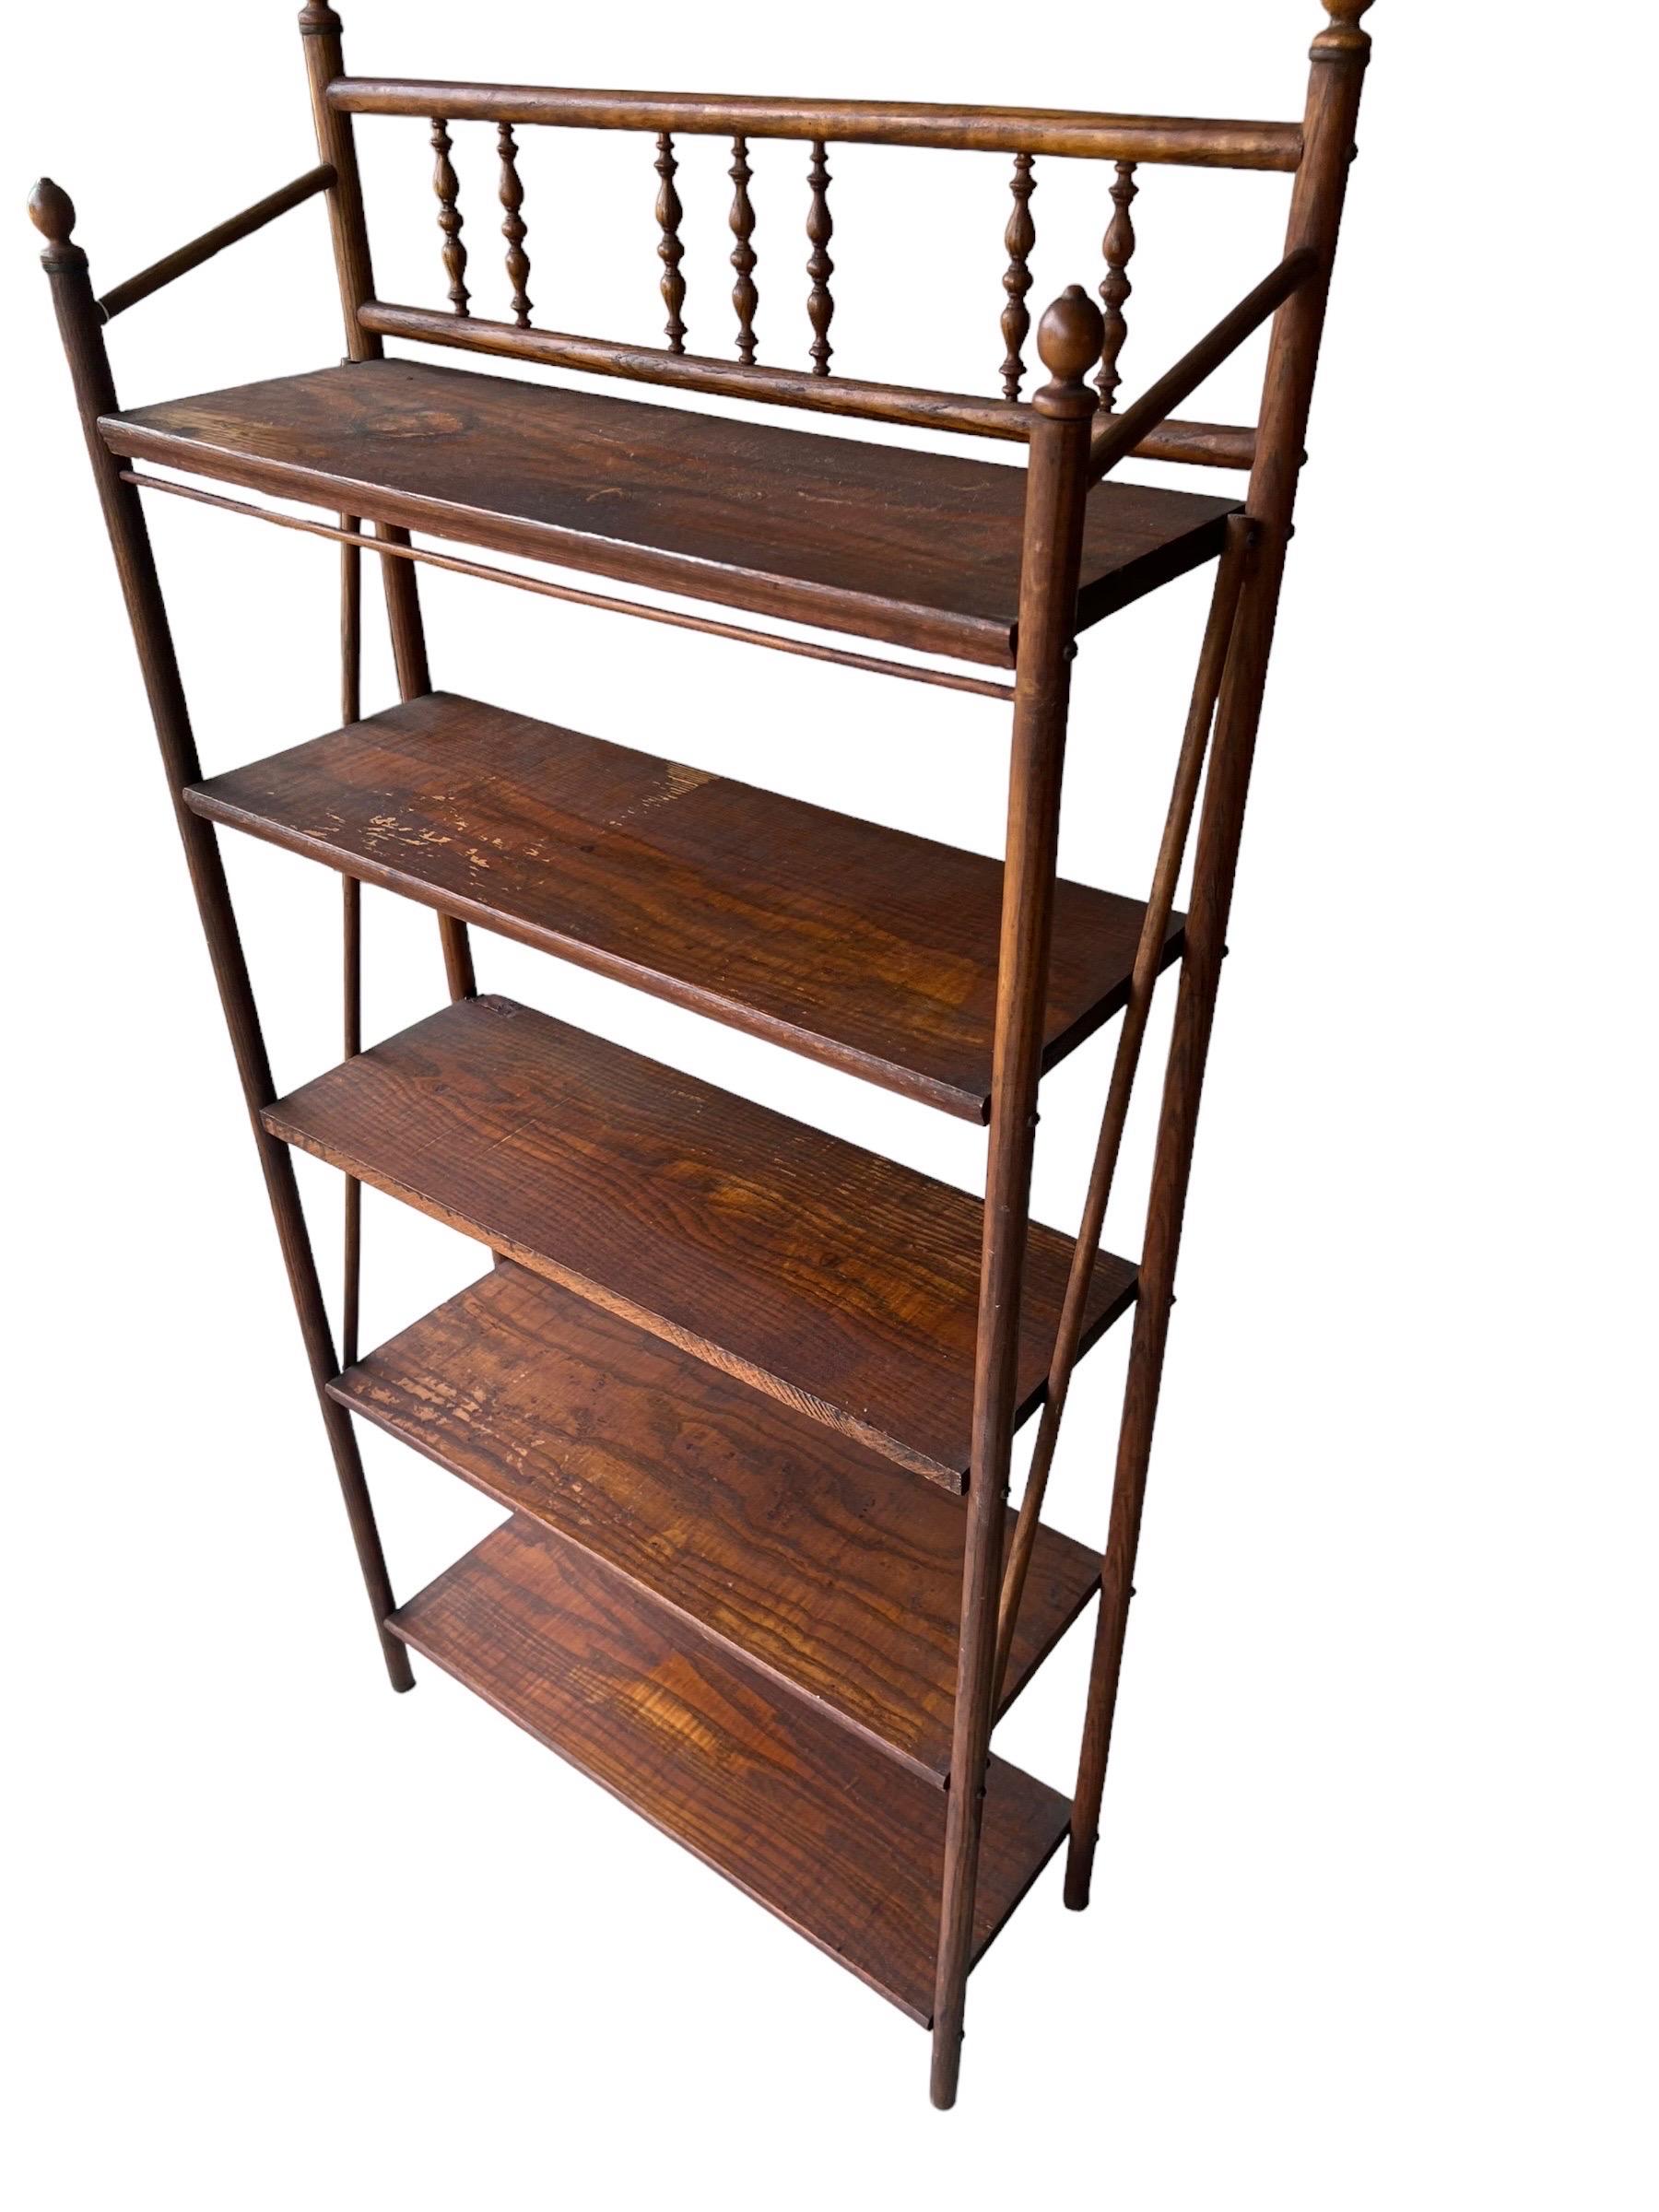 Antique Wood Etagere Book Shelf or Bookcase Bobbin Wooden Turned Details In Good Condition For Sale In Seattle, WA